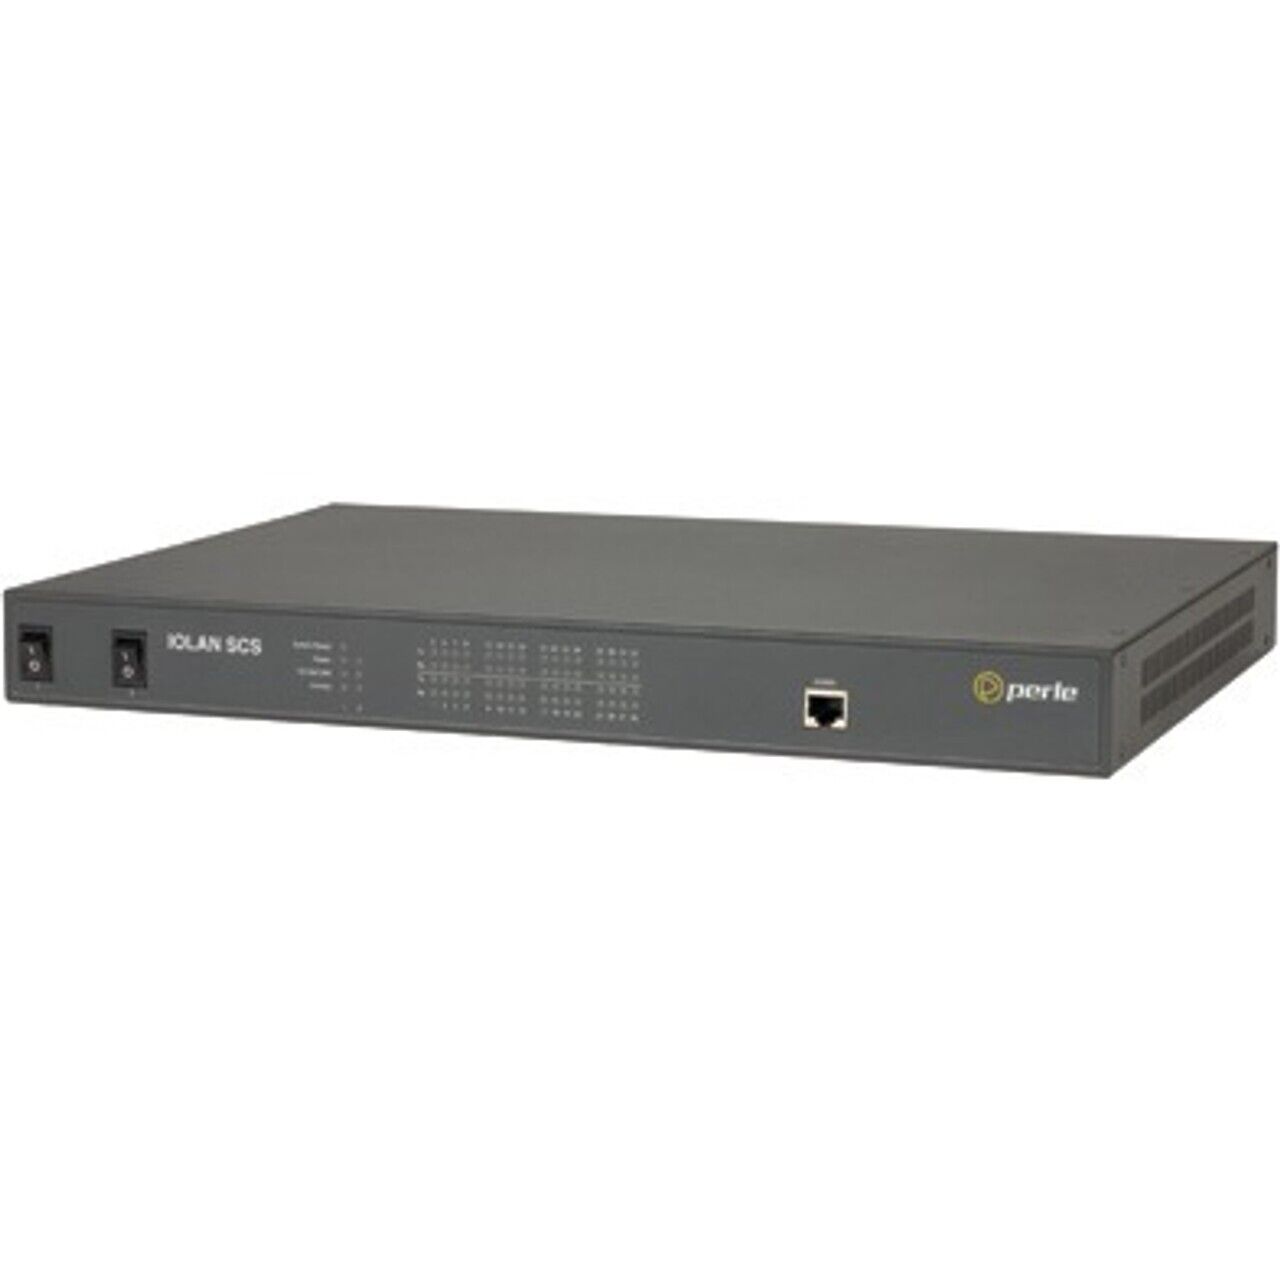 Perle Systems Iolan SCS32C 32 Port RJ45 DC Console Server, 1 Year Warranty